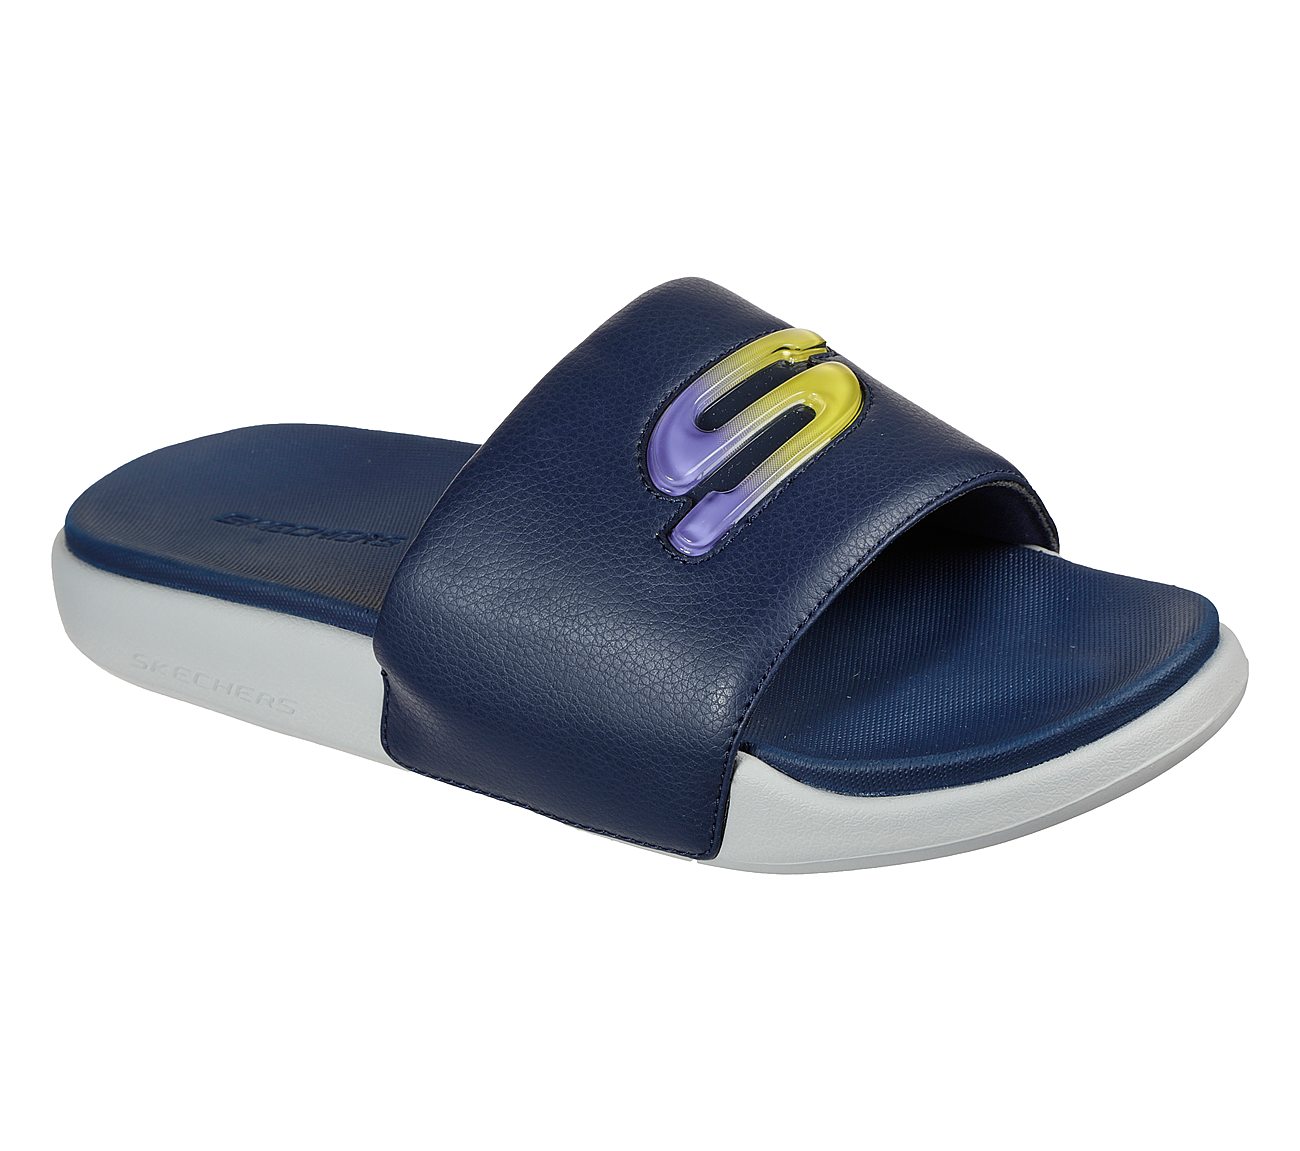 GAMBIX 2.0-UTOPO, NAVY/CHARCOAL Footwear Lateral View